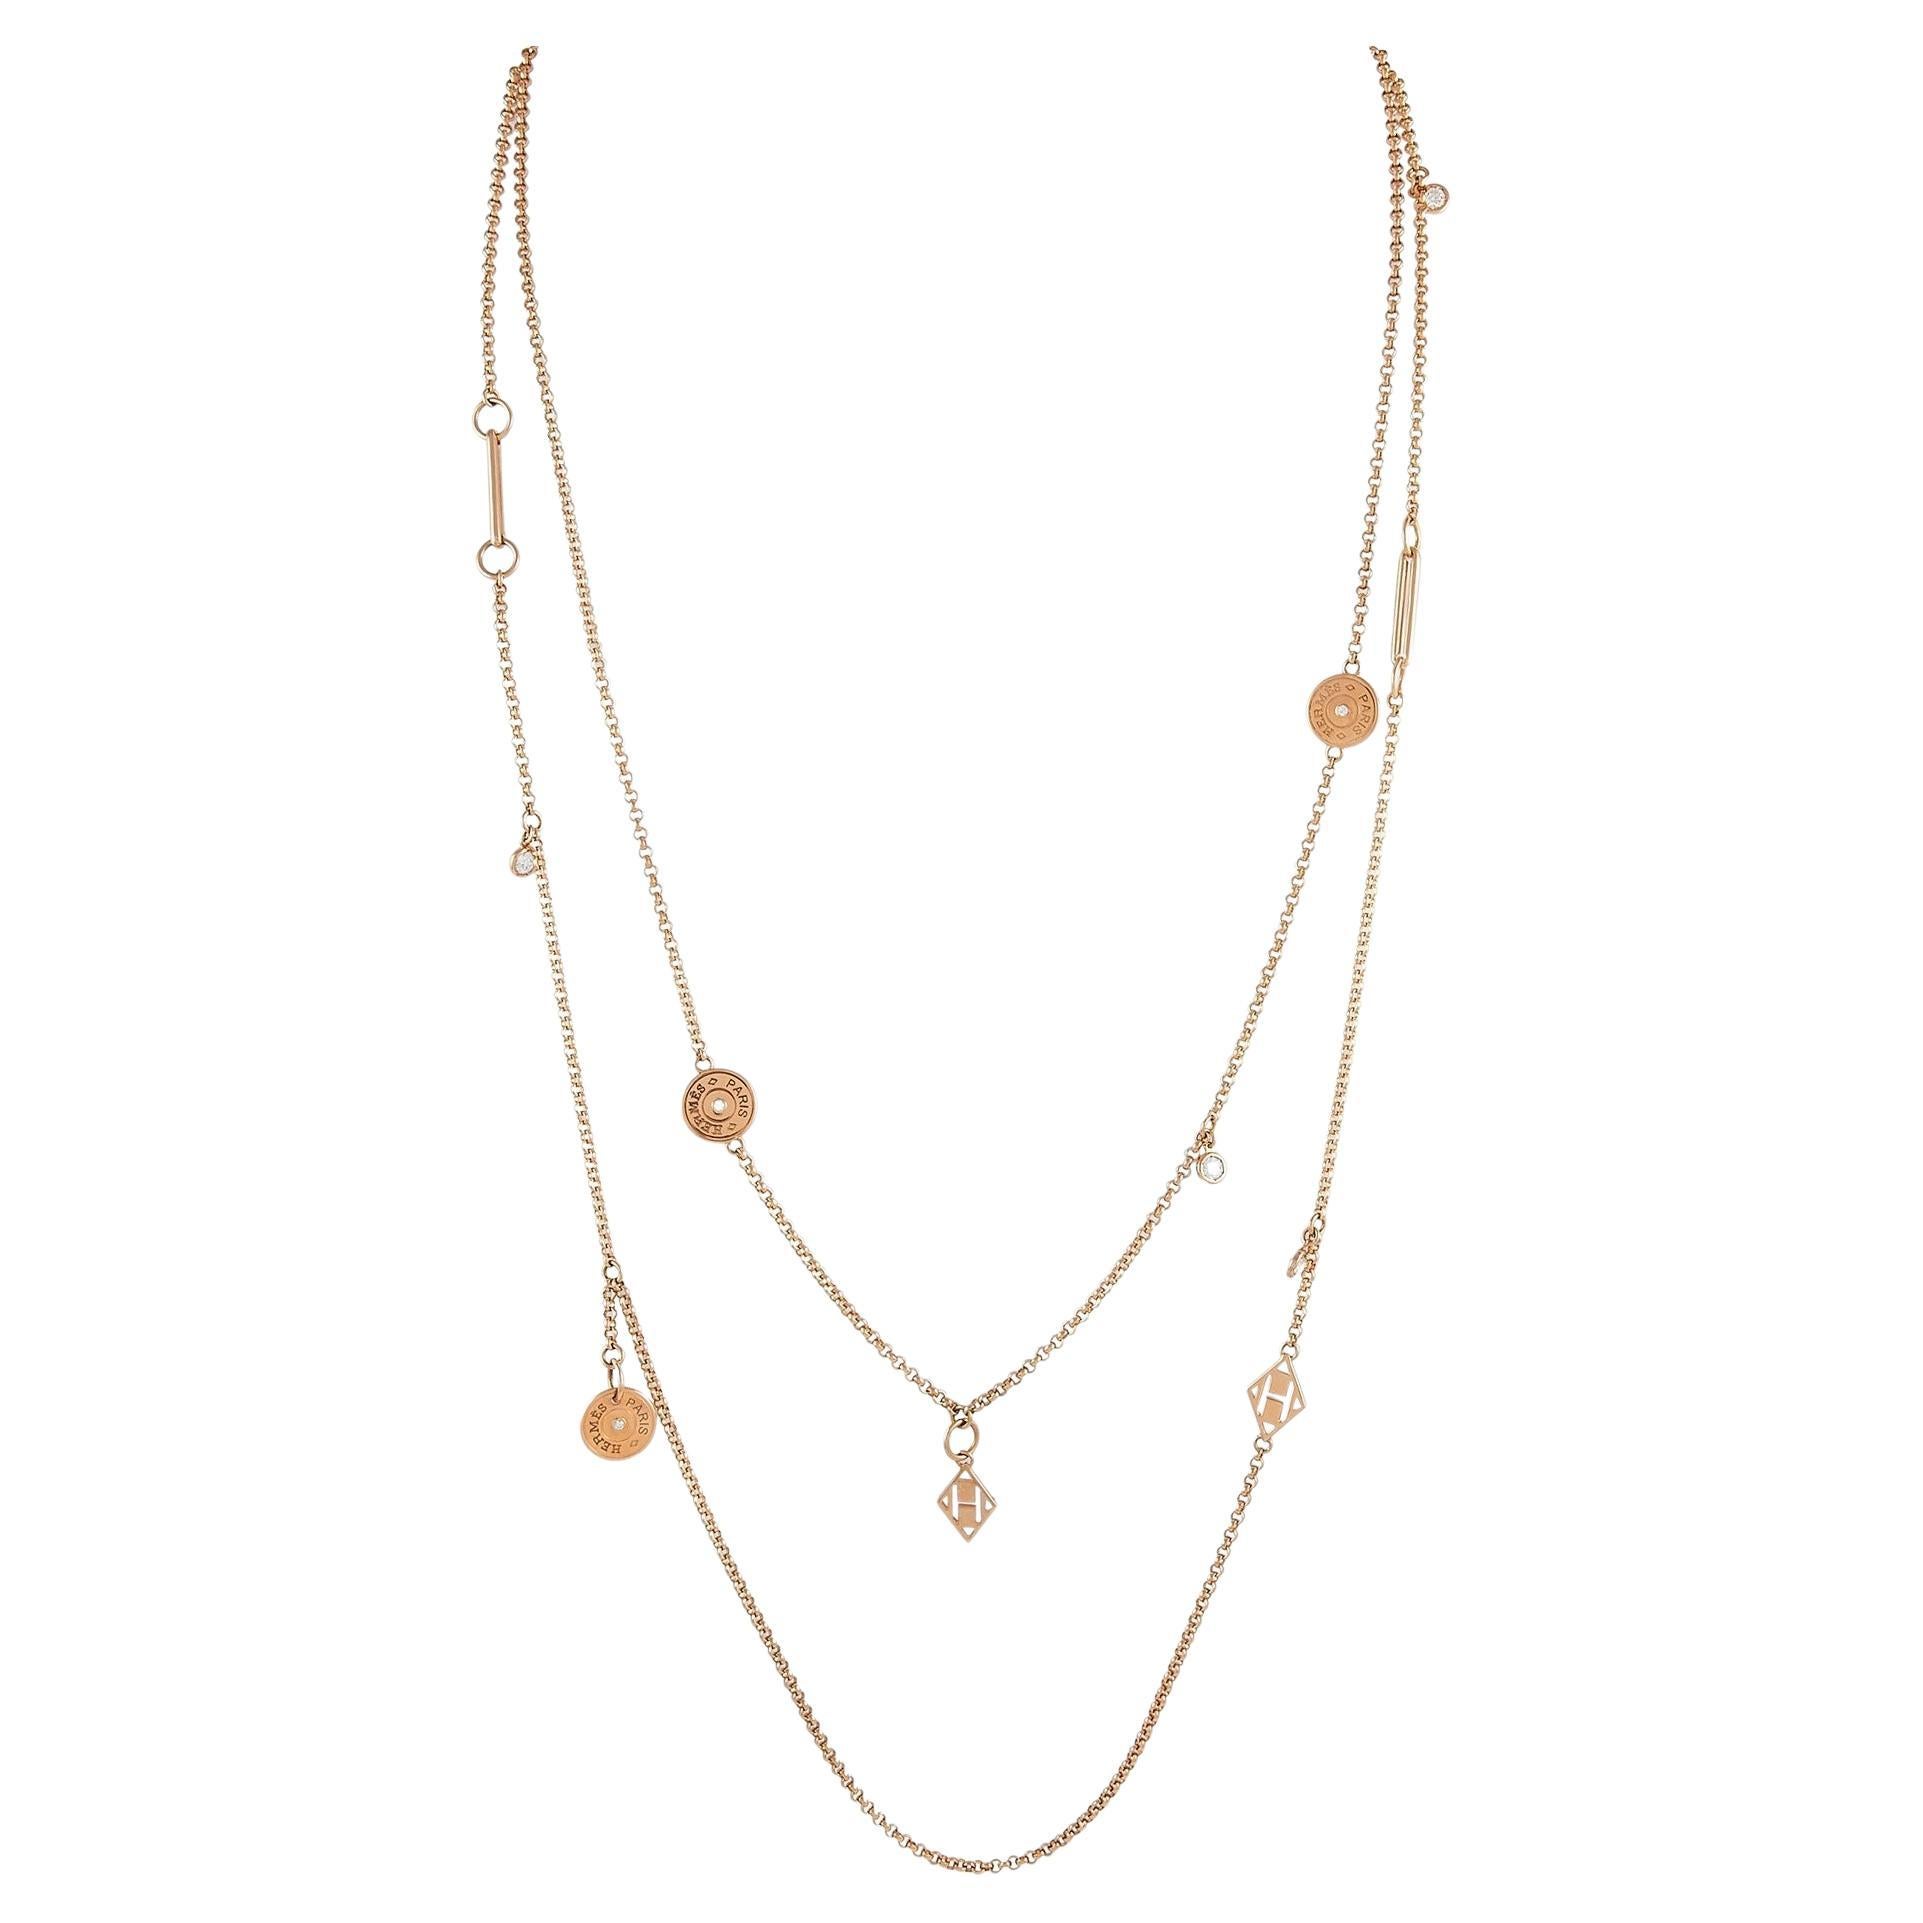 Herm S Diamond Collier Gambade Lariat Necklace In K Rose Gold F G Vs